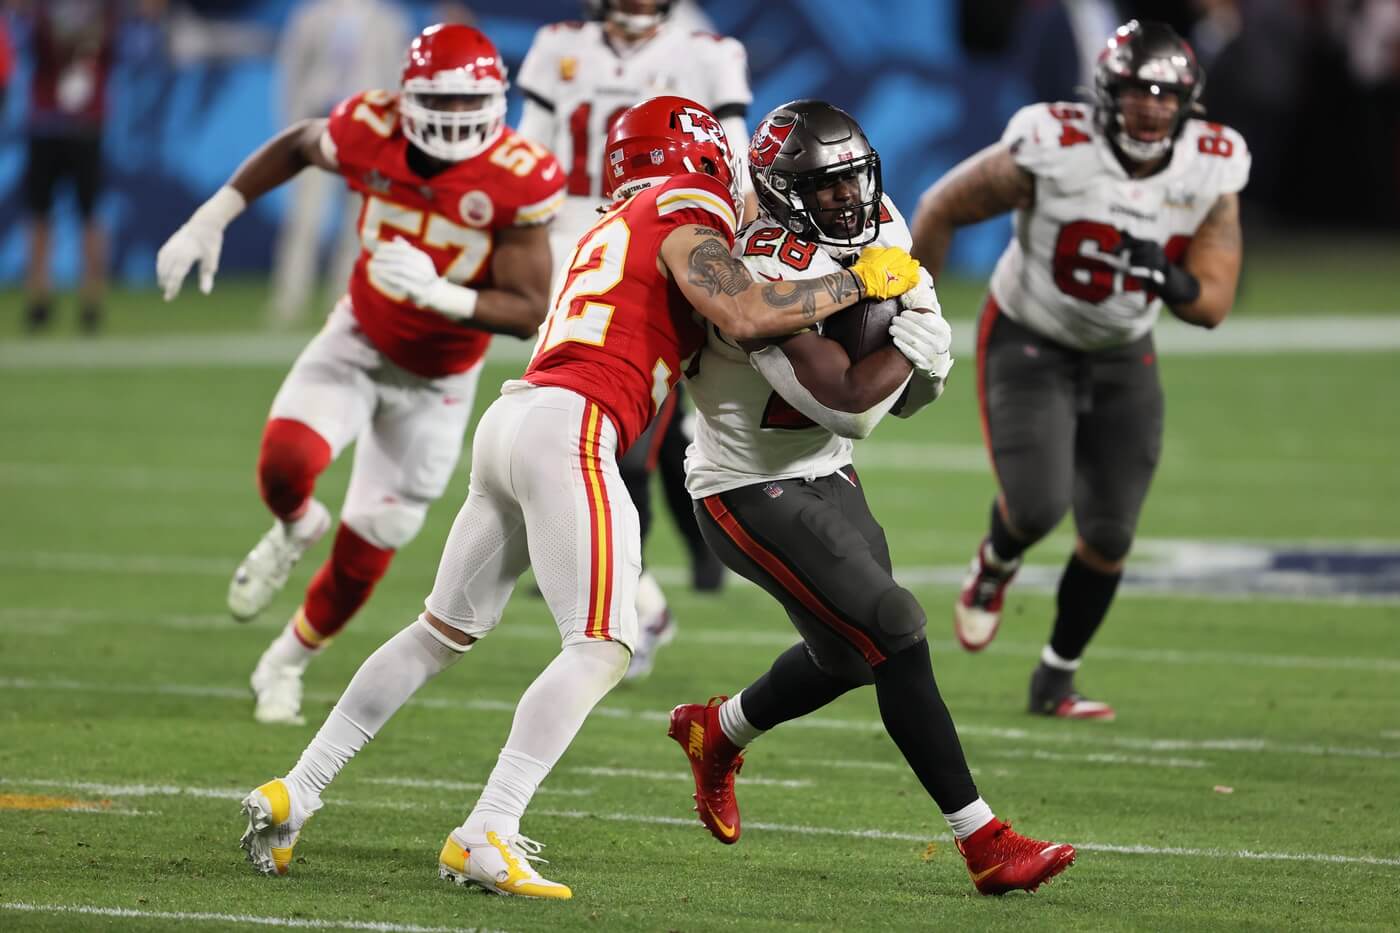 Tampa Bay Buccaneers running back Leonard Fournette (28) is tackled by Kansas City Chiefs strong safety Tyrann Mathieu (32) in the second half during Super Bowl LV at Raymond James Stadium.